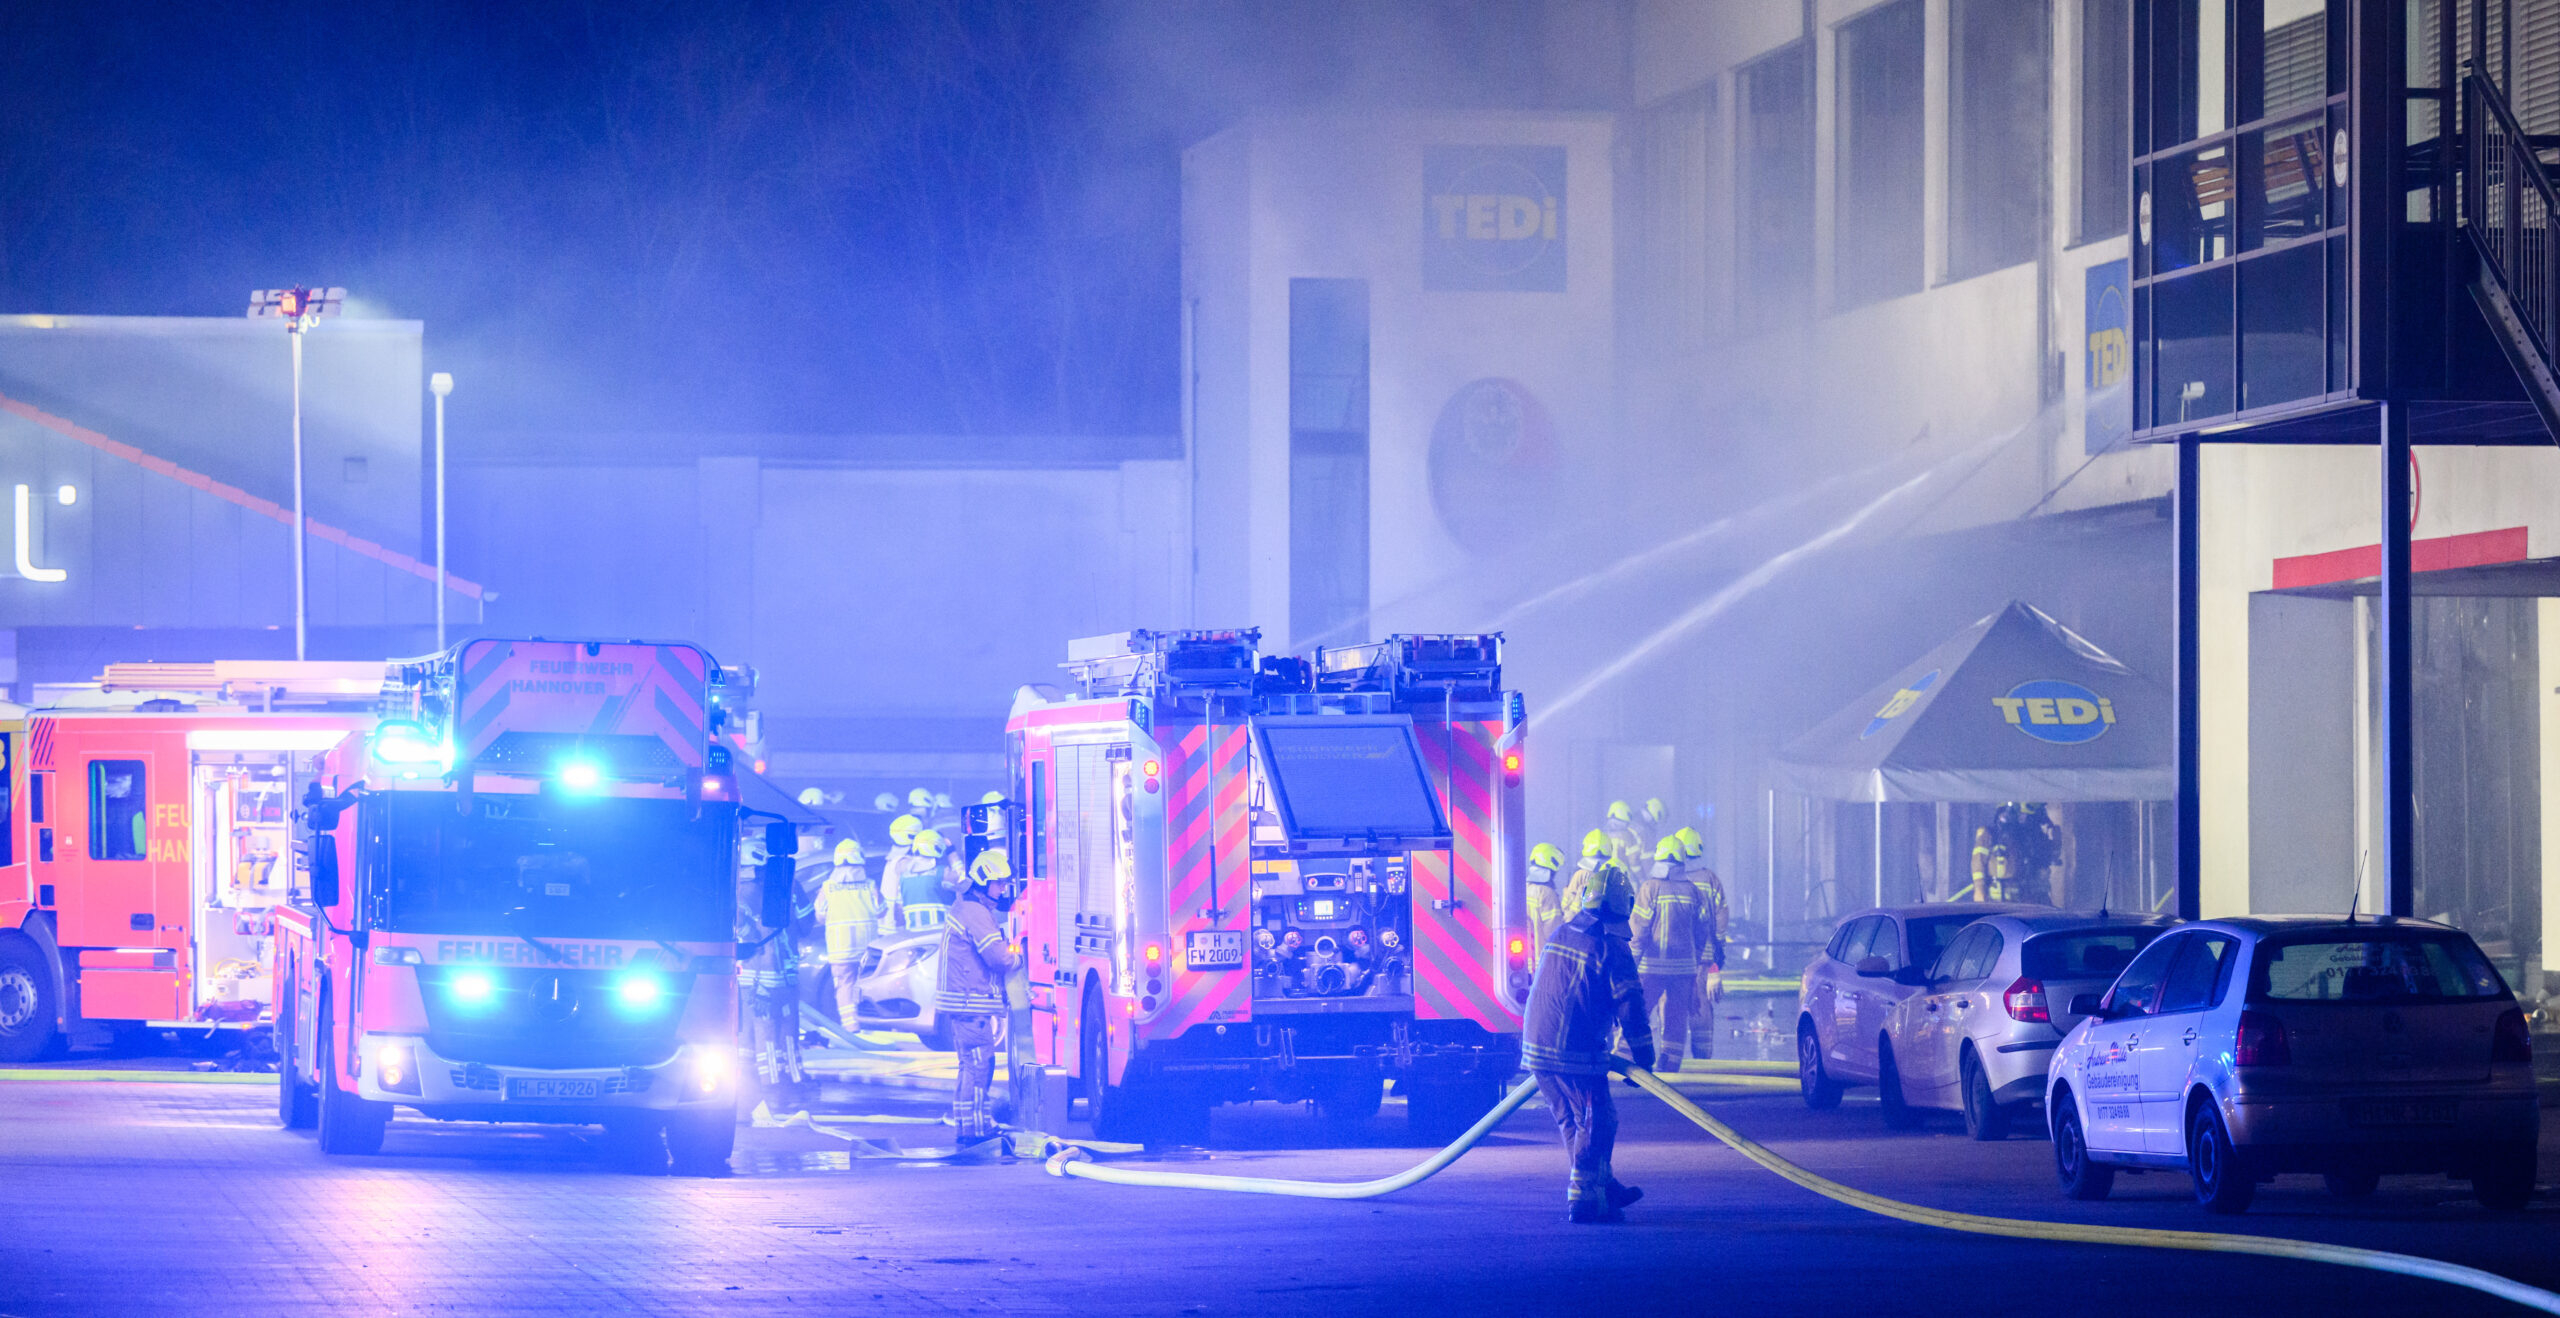 Feuer bei Tedi in Hannover